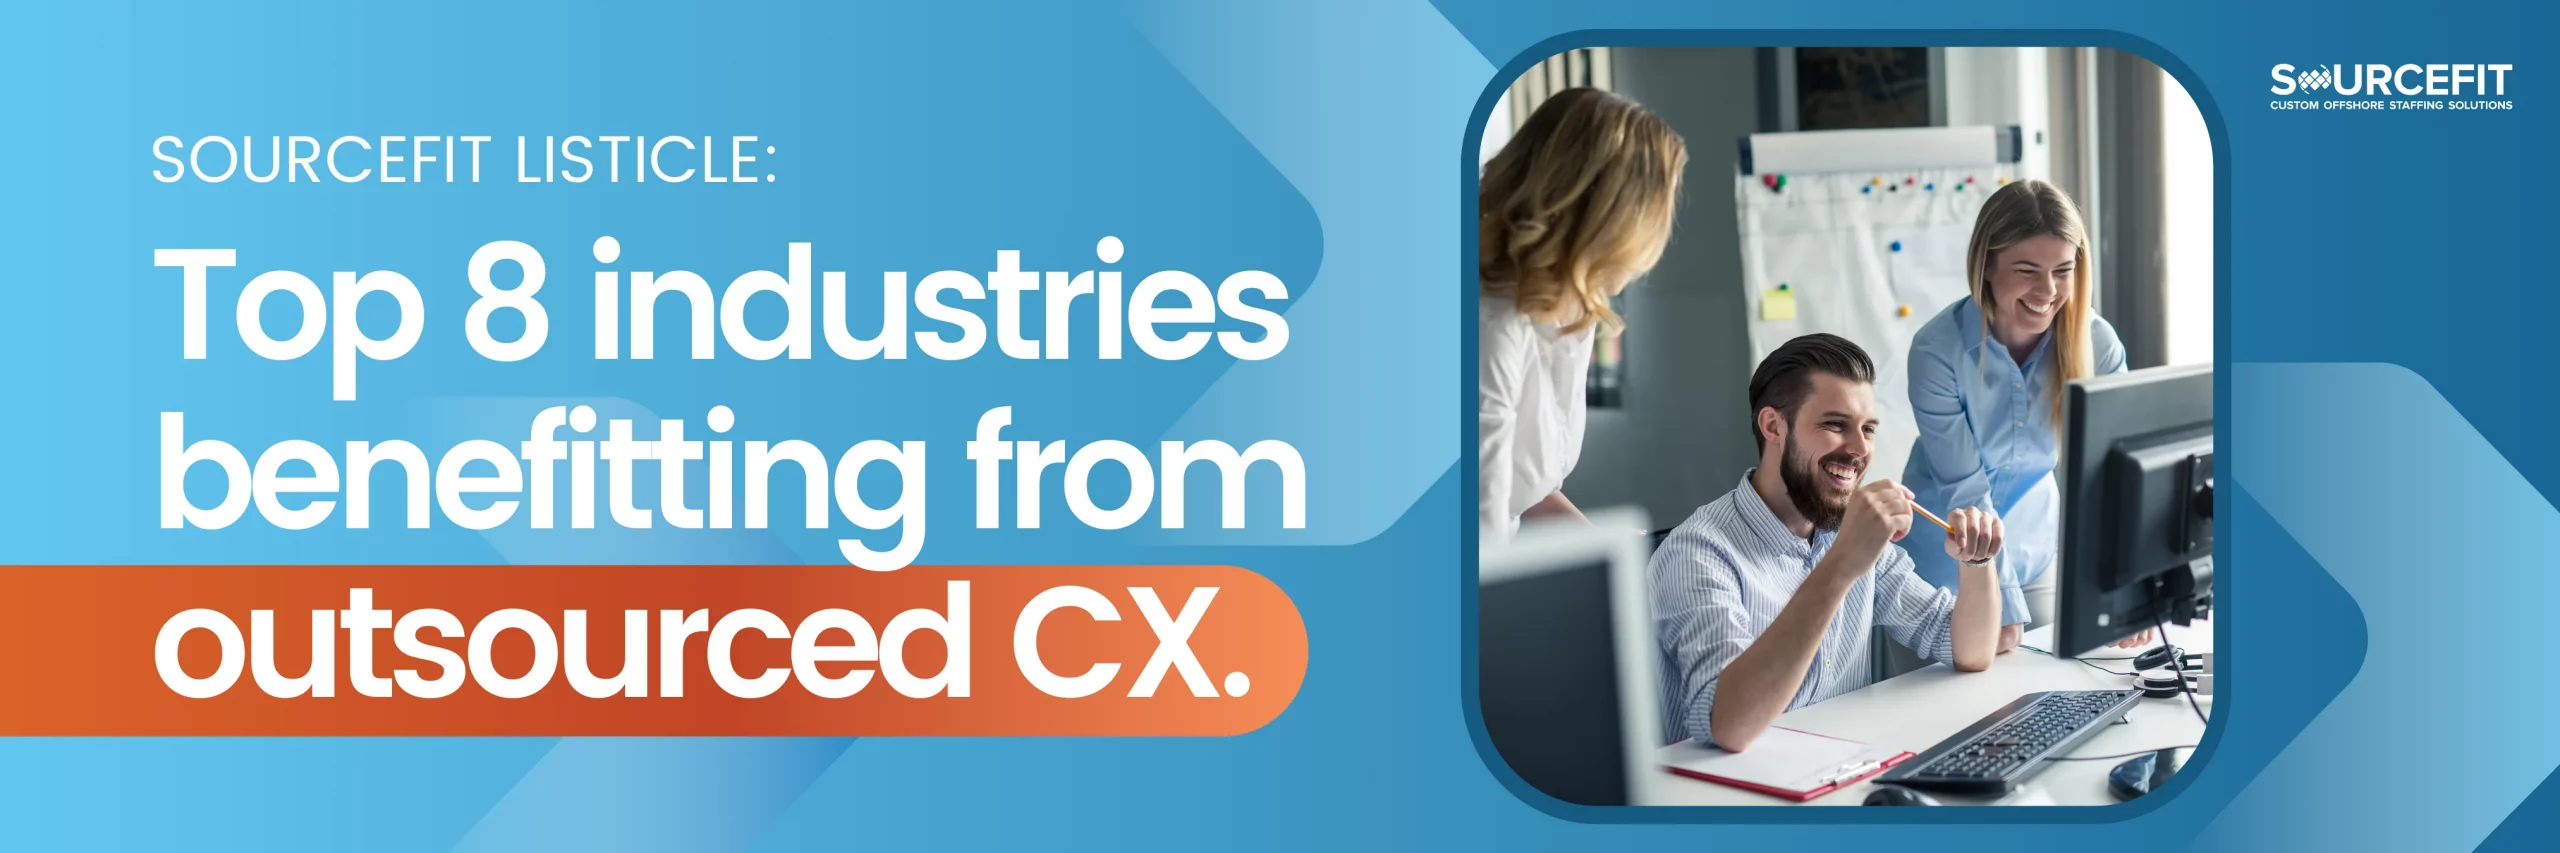 Top-8-industries-benefitting-from-outsourced-CX._1200x628